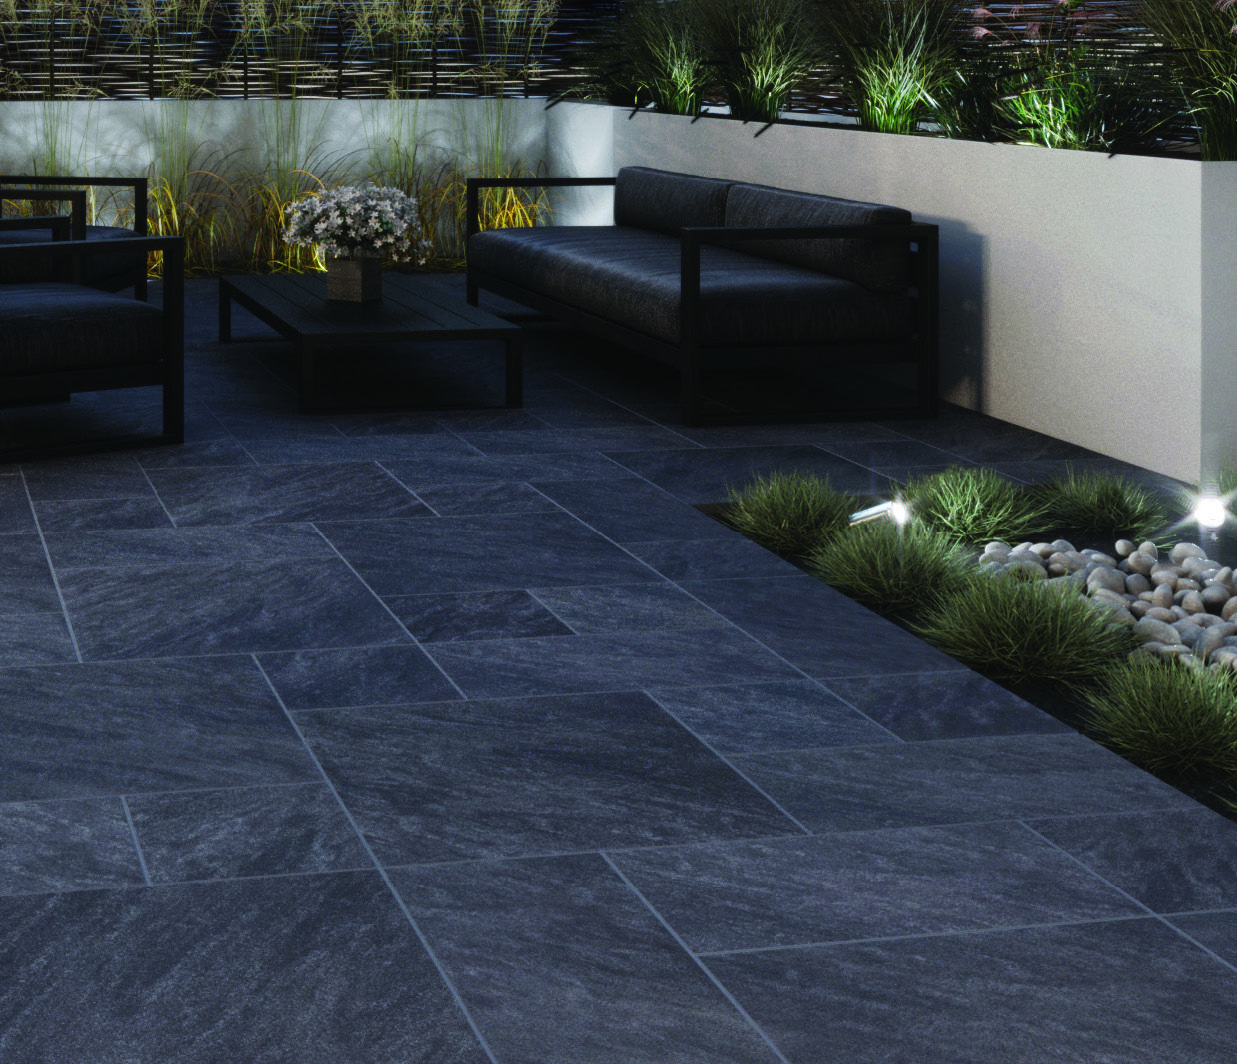 Here is the Bradstone Aspero in the Graphite.This is the darkest shade within the range which has a fine texture featuring mica crystals to add interest and sparkle to your patio!